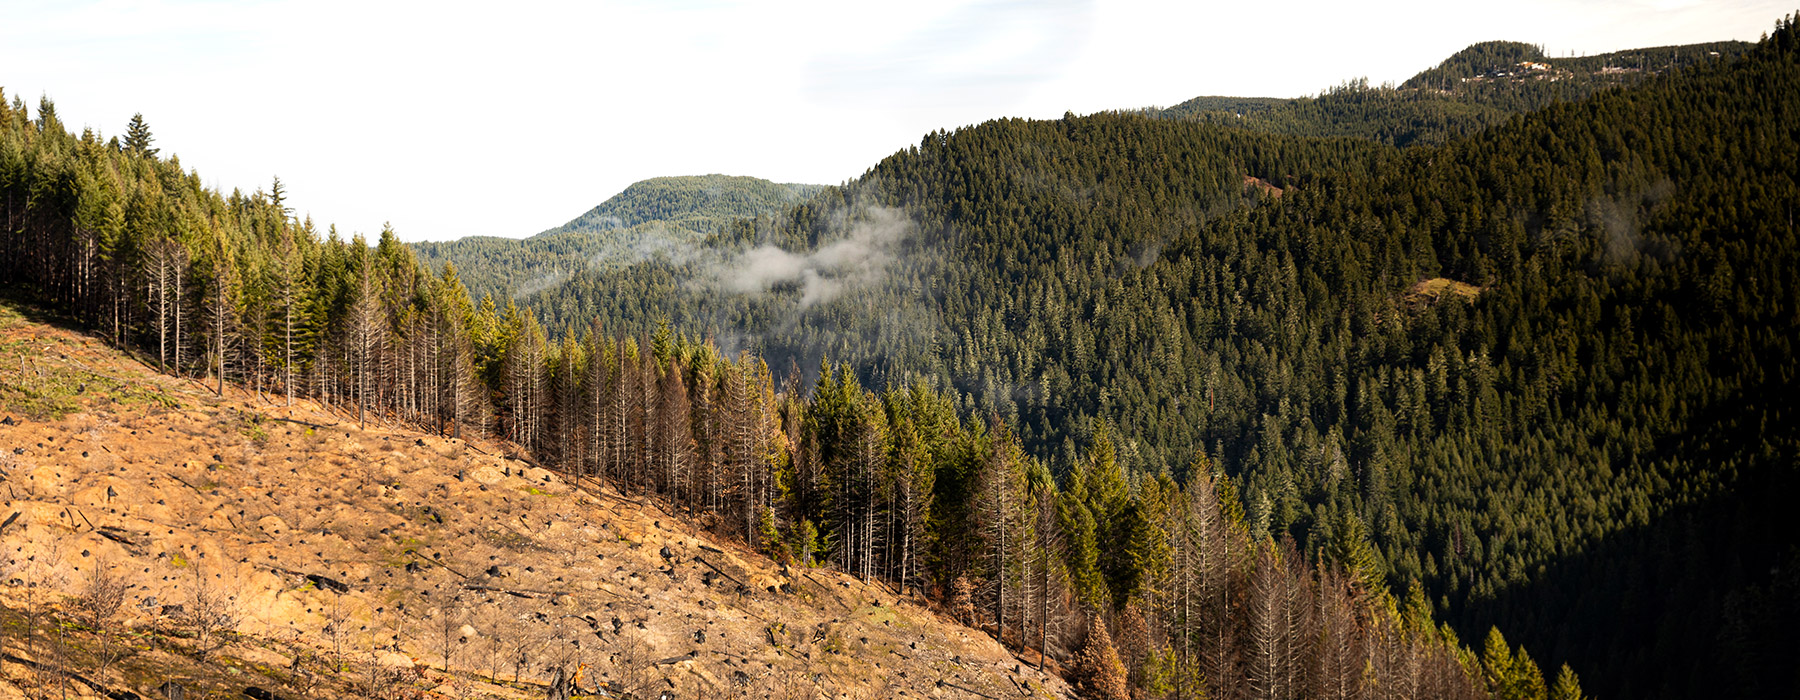 Area near Bogus Creek in southern Oregon, which was devastated by the Umpqua National Forest fire in the summer 2021. Mark Stone/University of Washington